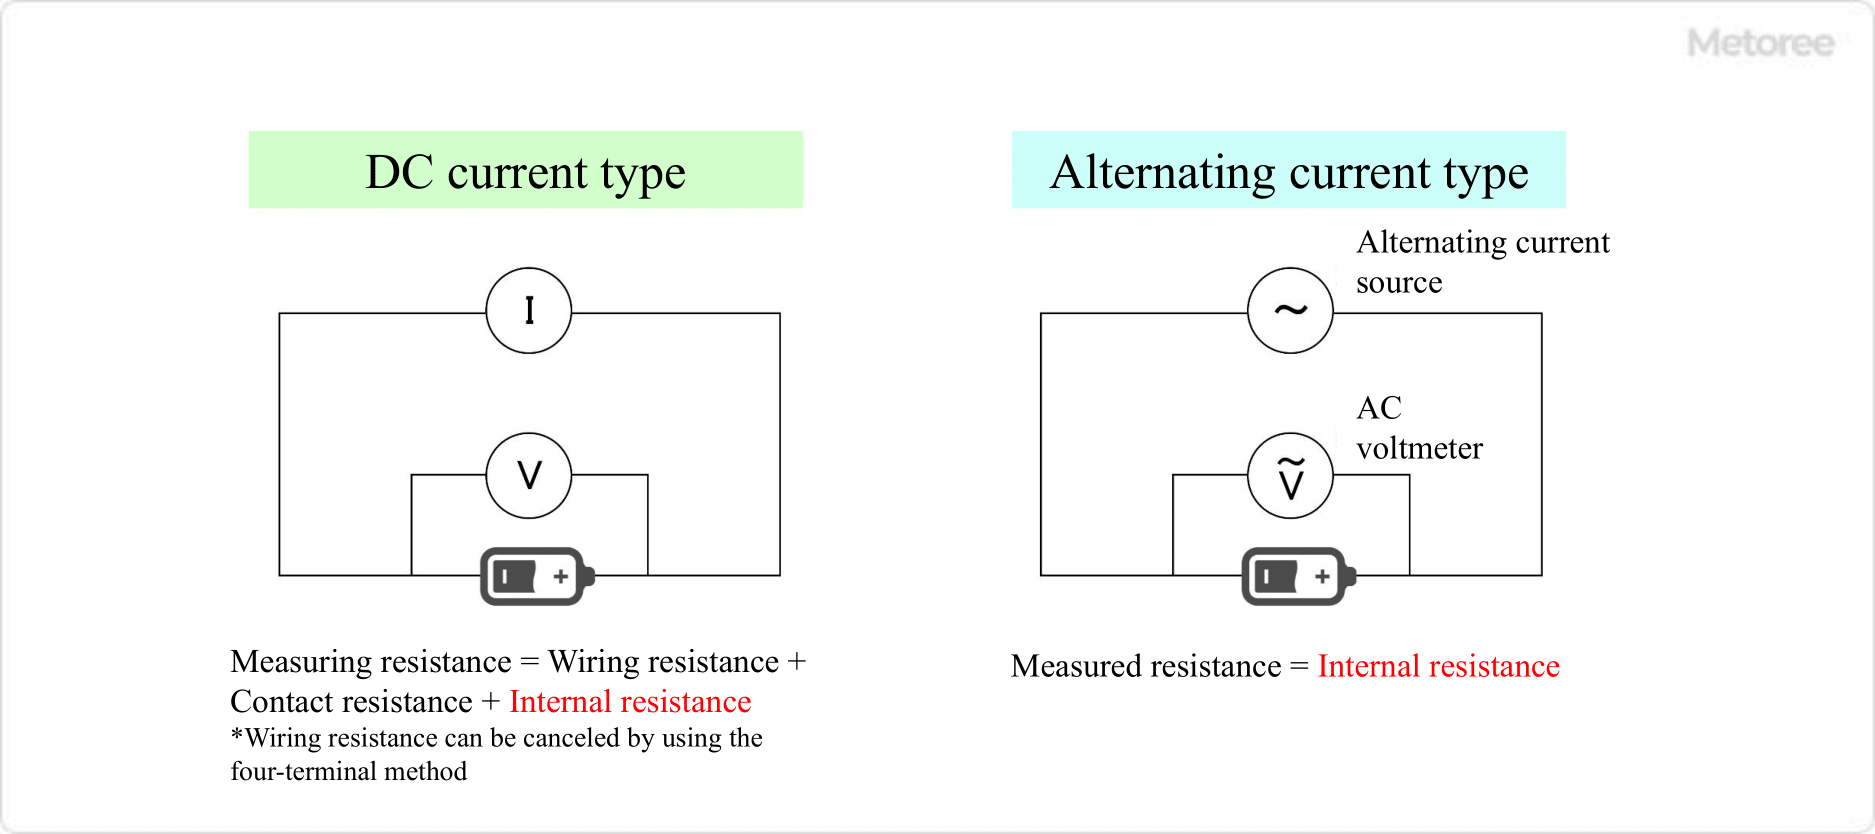 Figure 2. Schematic diagram of DC current type and AC current type